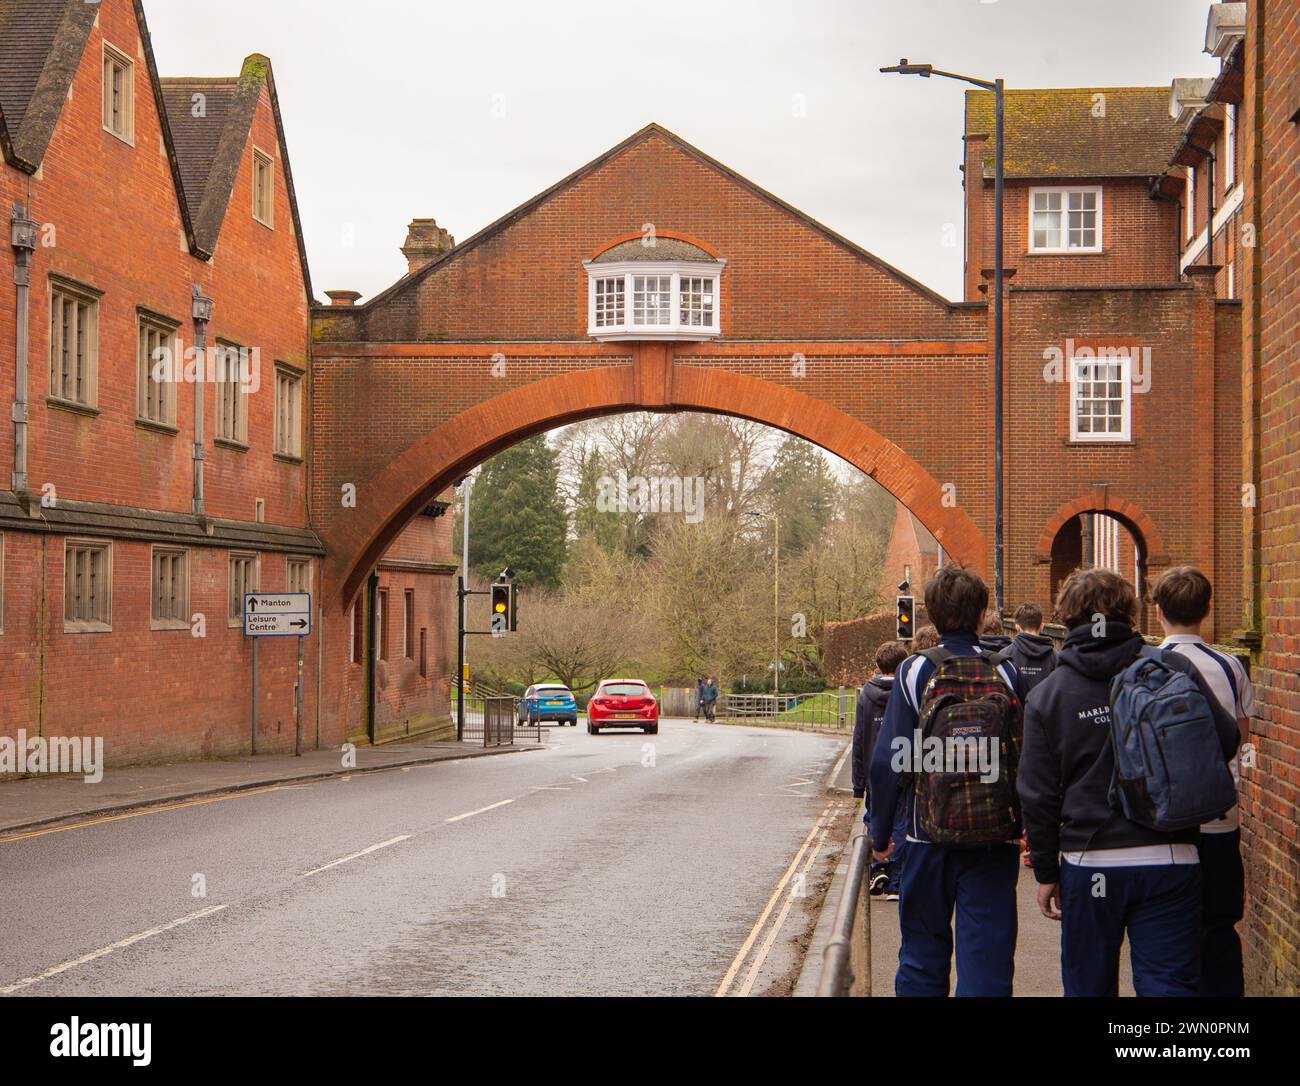 Marlborough college buildings private boarding and day school with archway across the road and pupils walking along the pavement Wiltshire UK Stock Photo